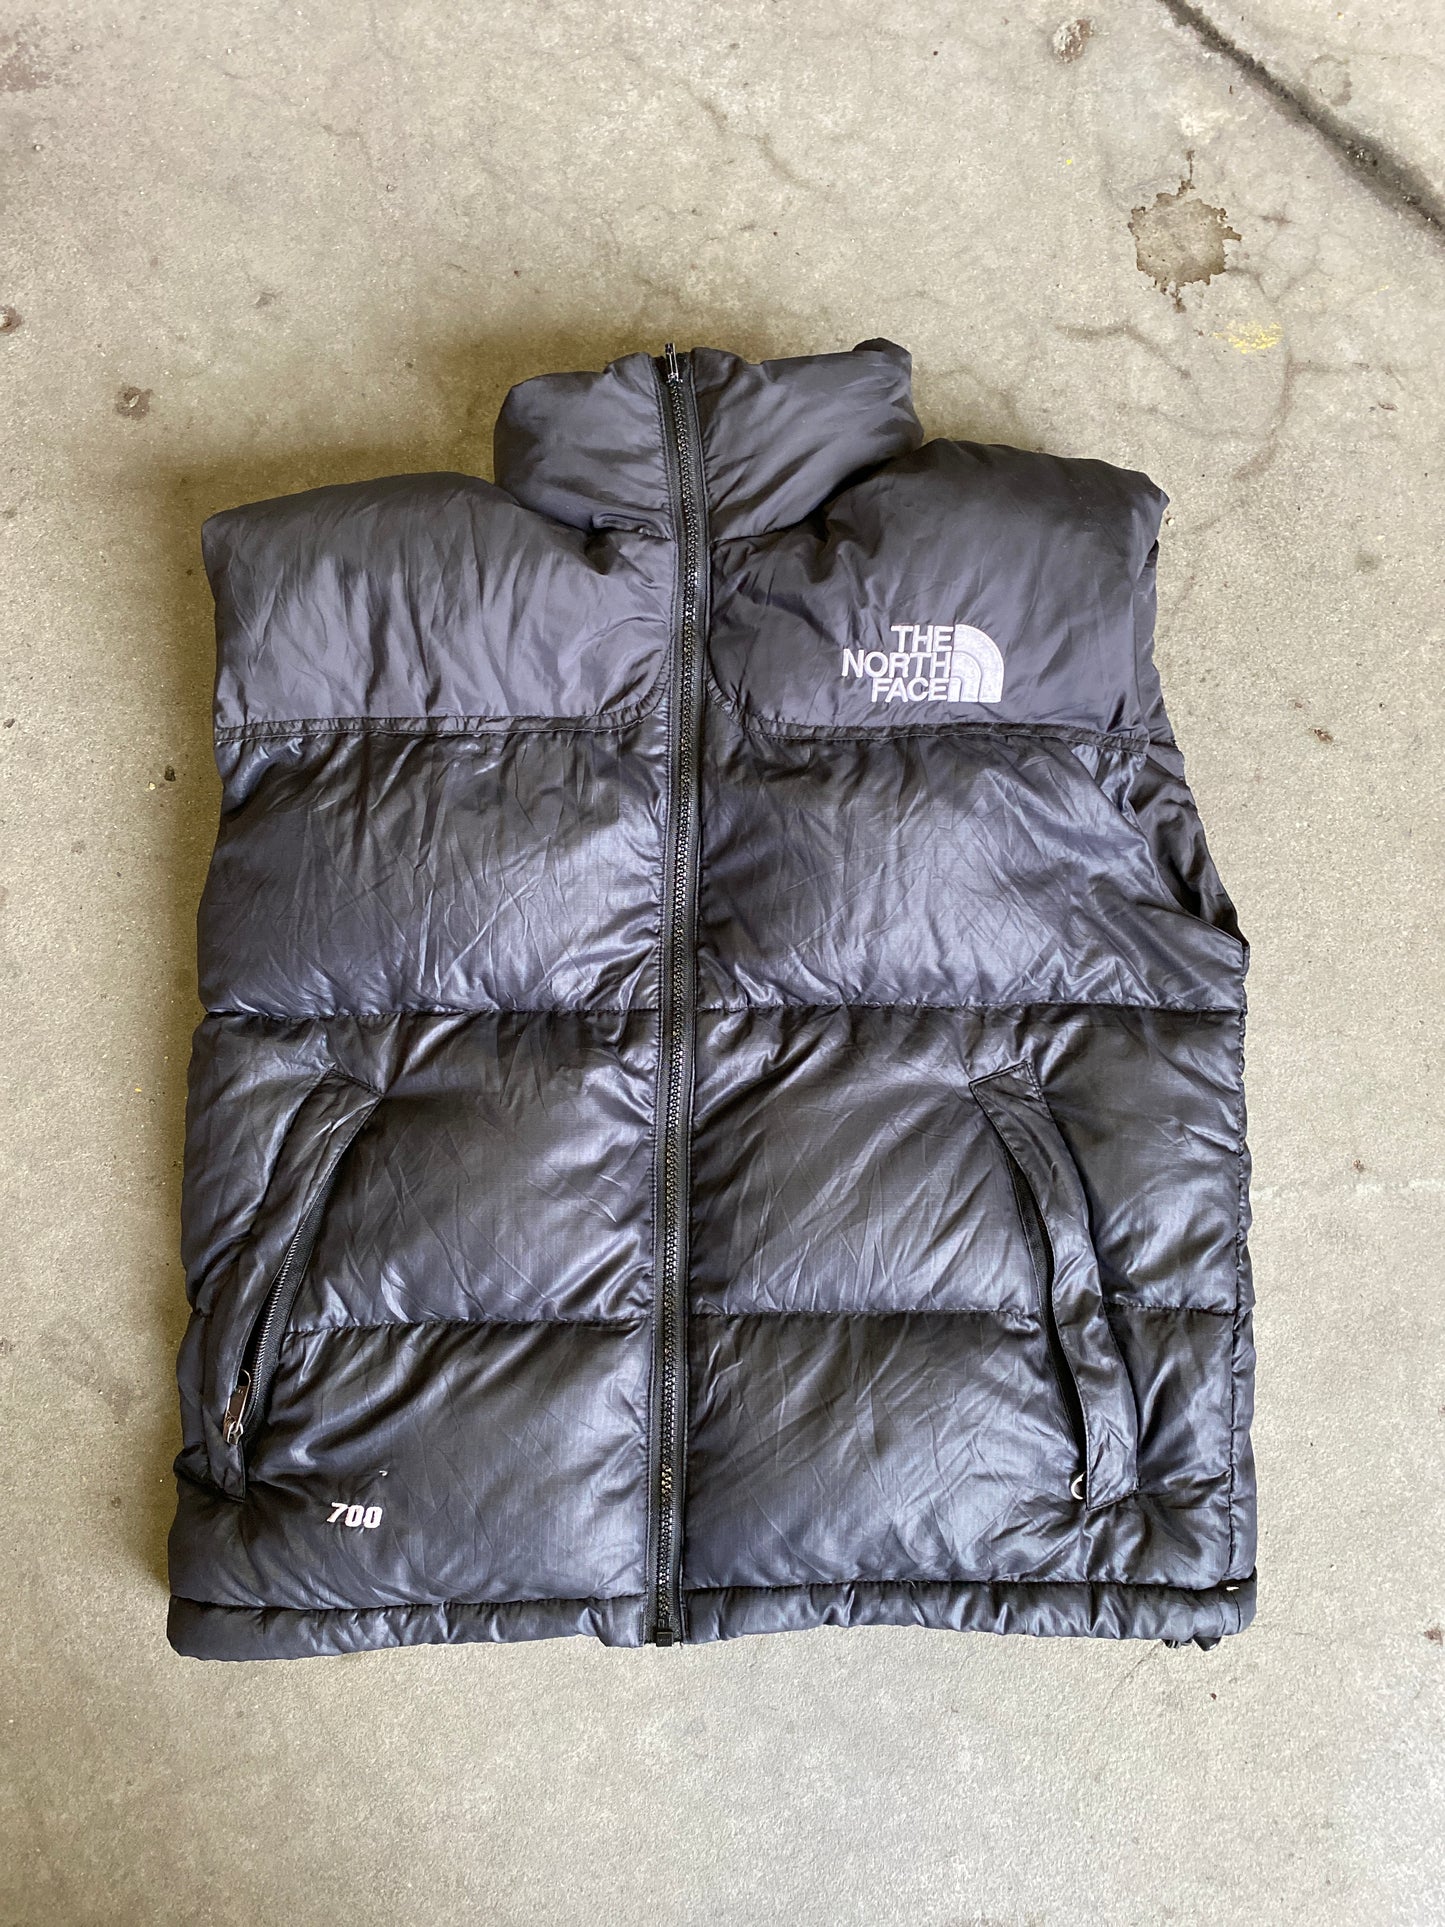 (XS/S) The North Face 700 Vest